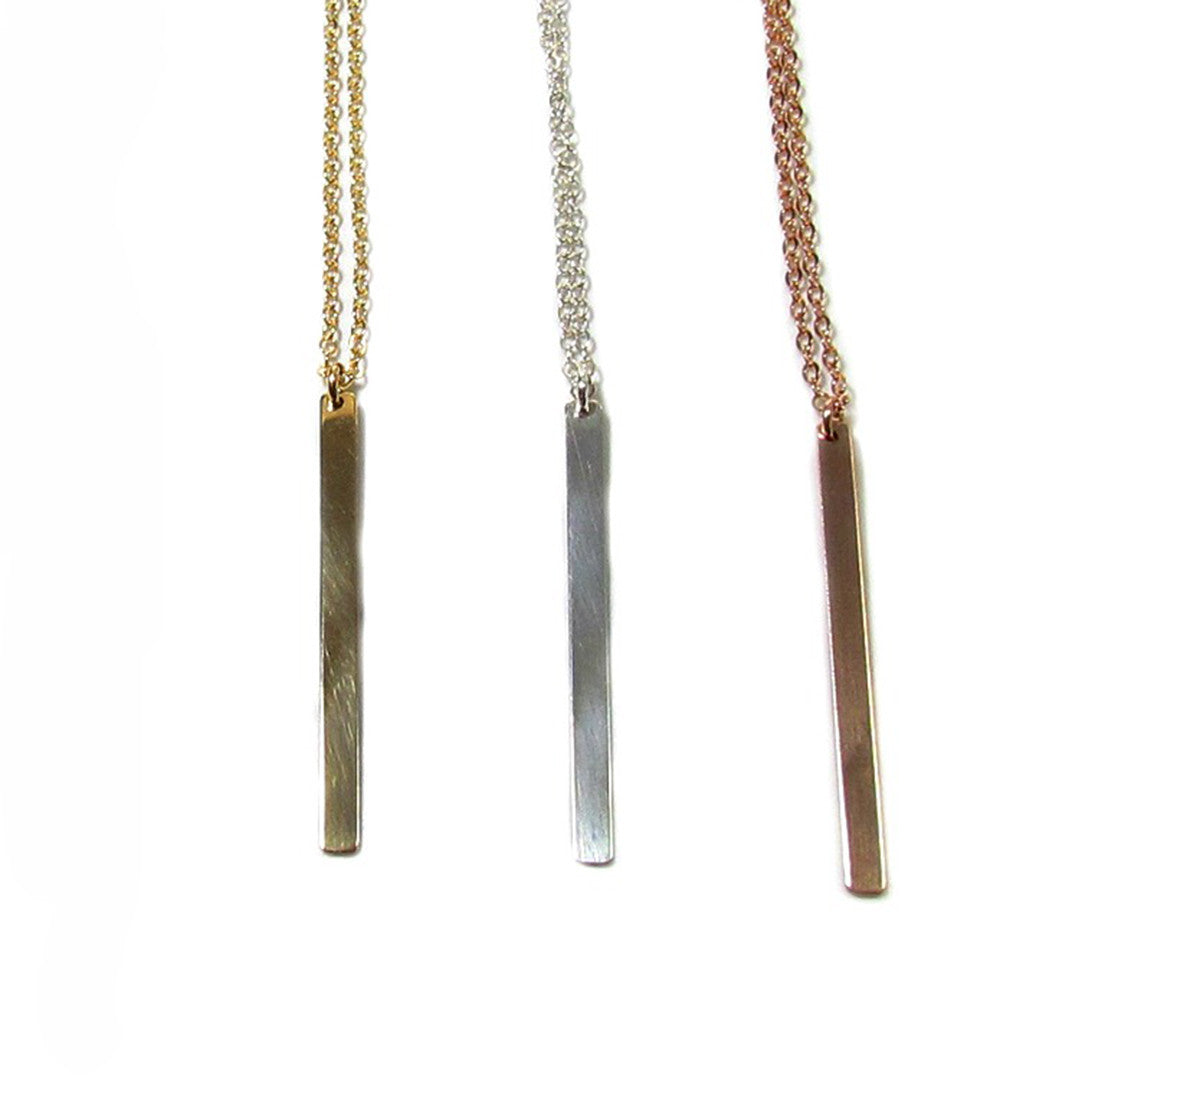 Set of 3 Layering Necklaces- Tiny Hammered Bead Necklace, Beaded Satellite Chain Necklace and Vertical Polished Bar Necklace